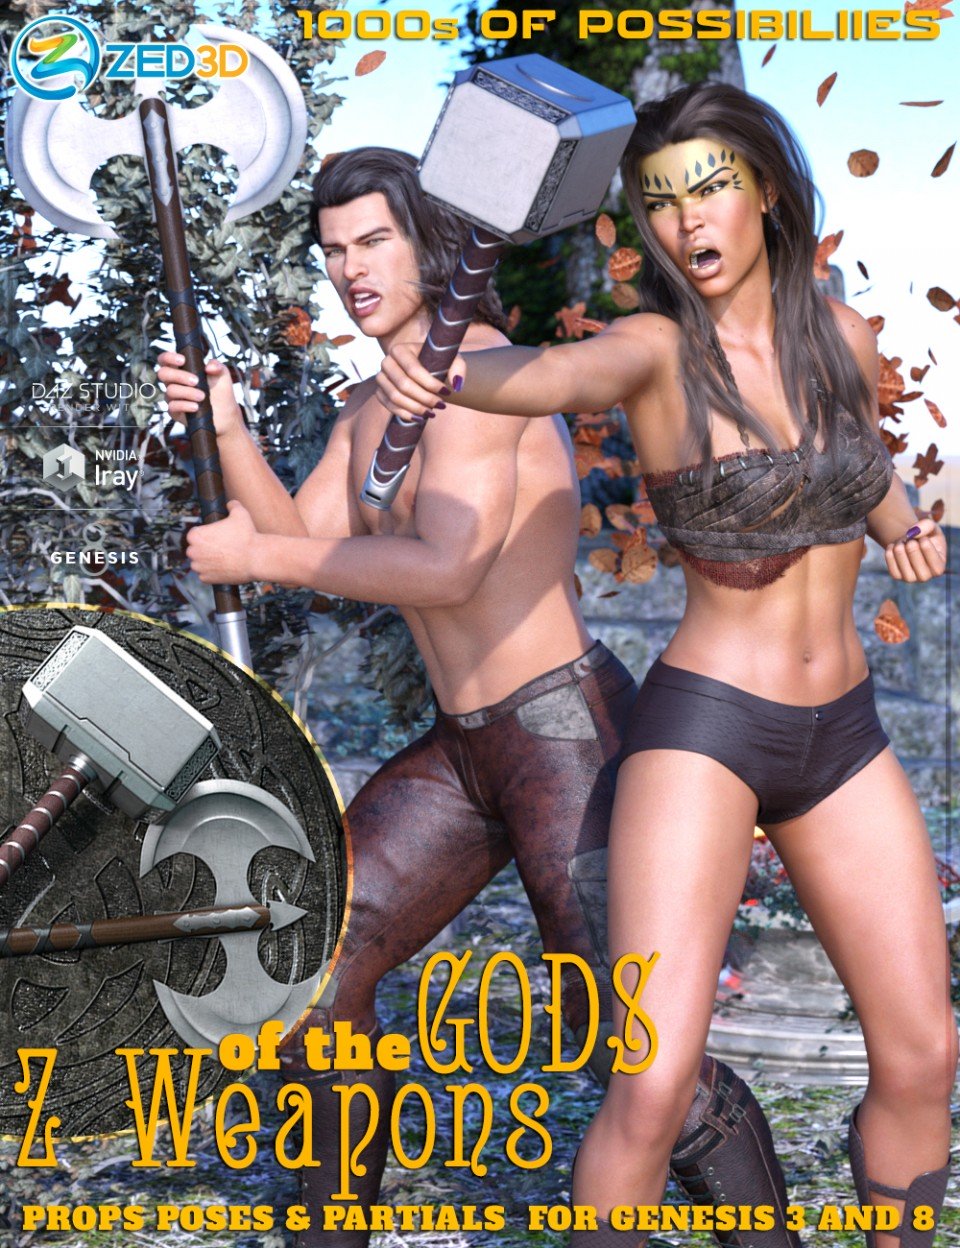 Z Weapons of the Gods and Poses for Genesis 3 and 8_DAZ3D下载站